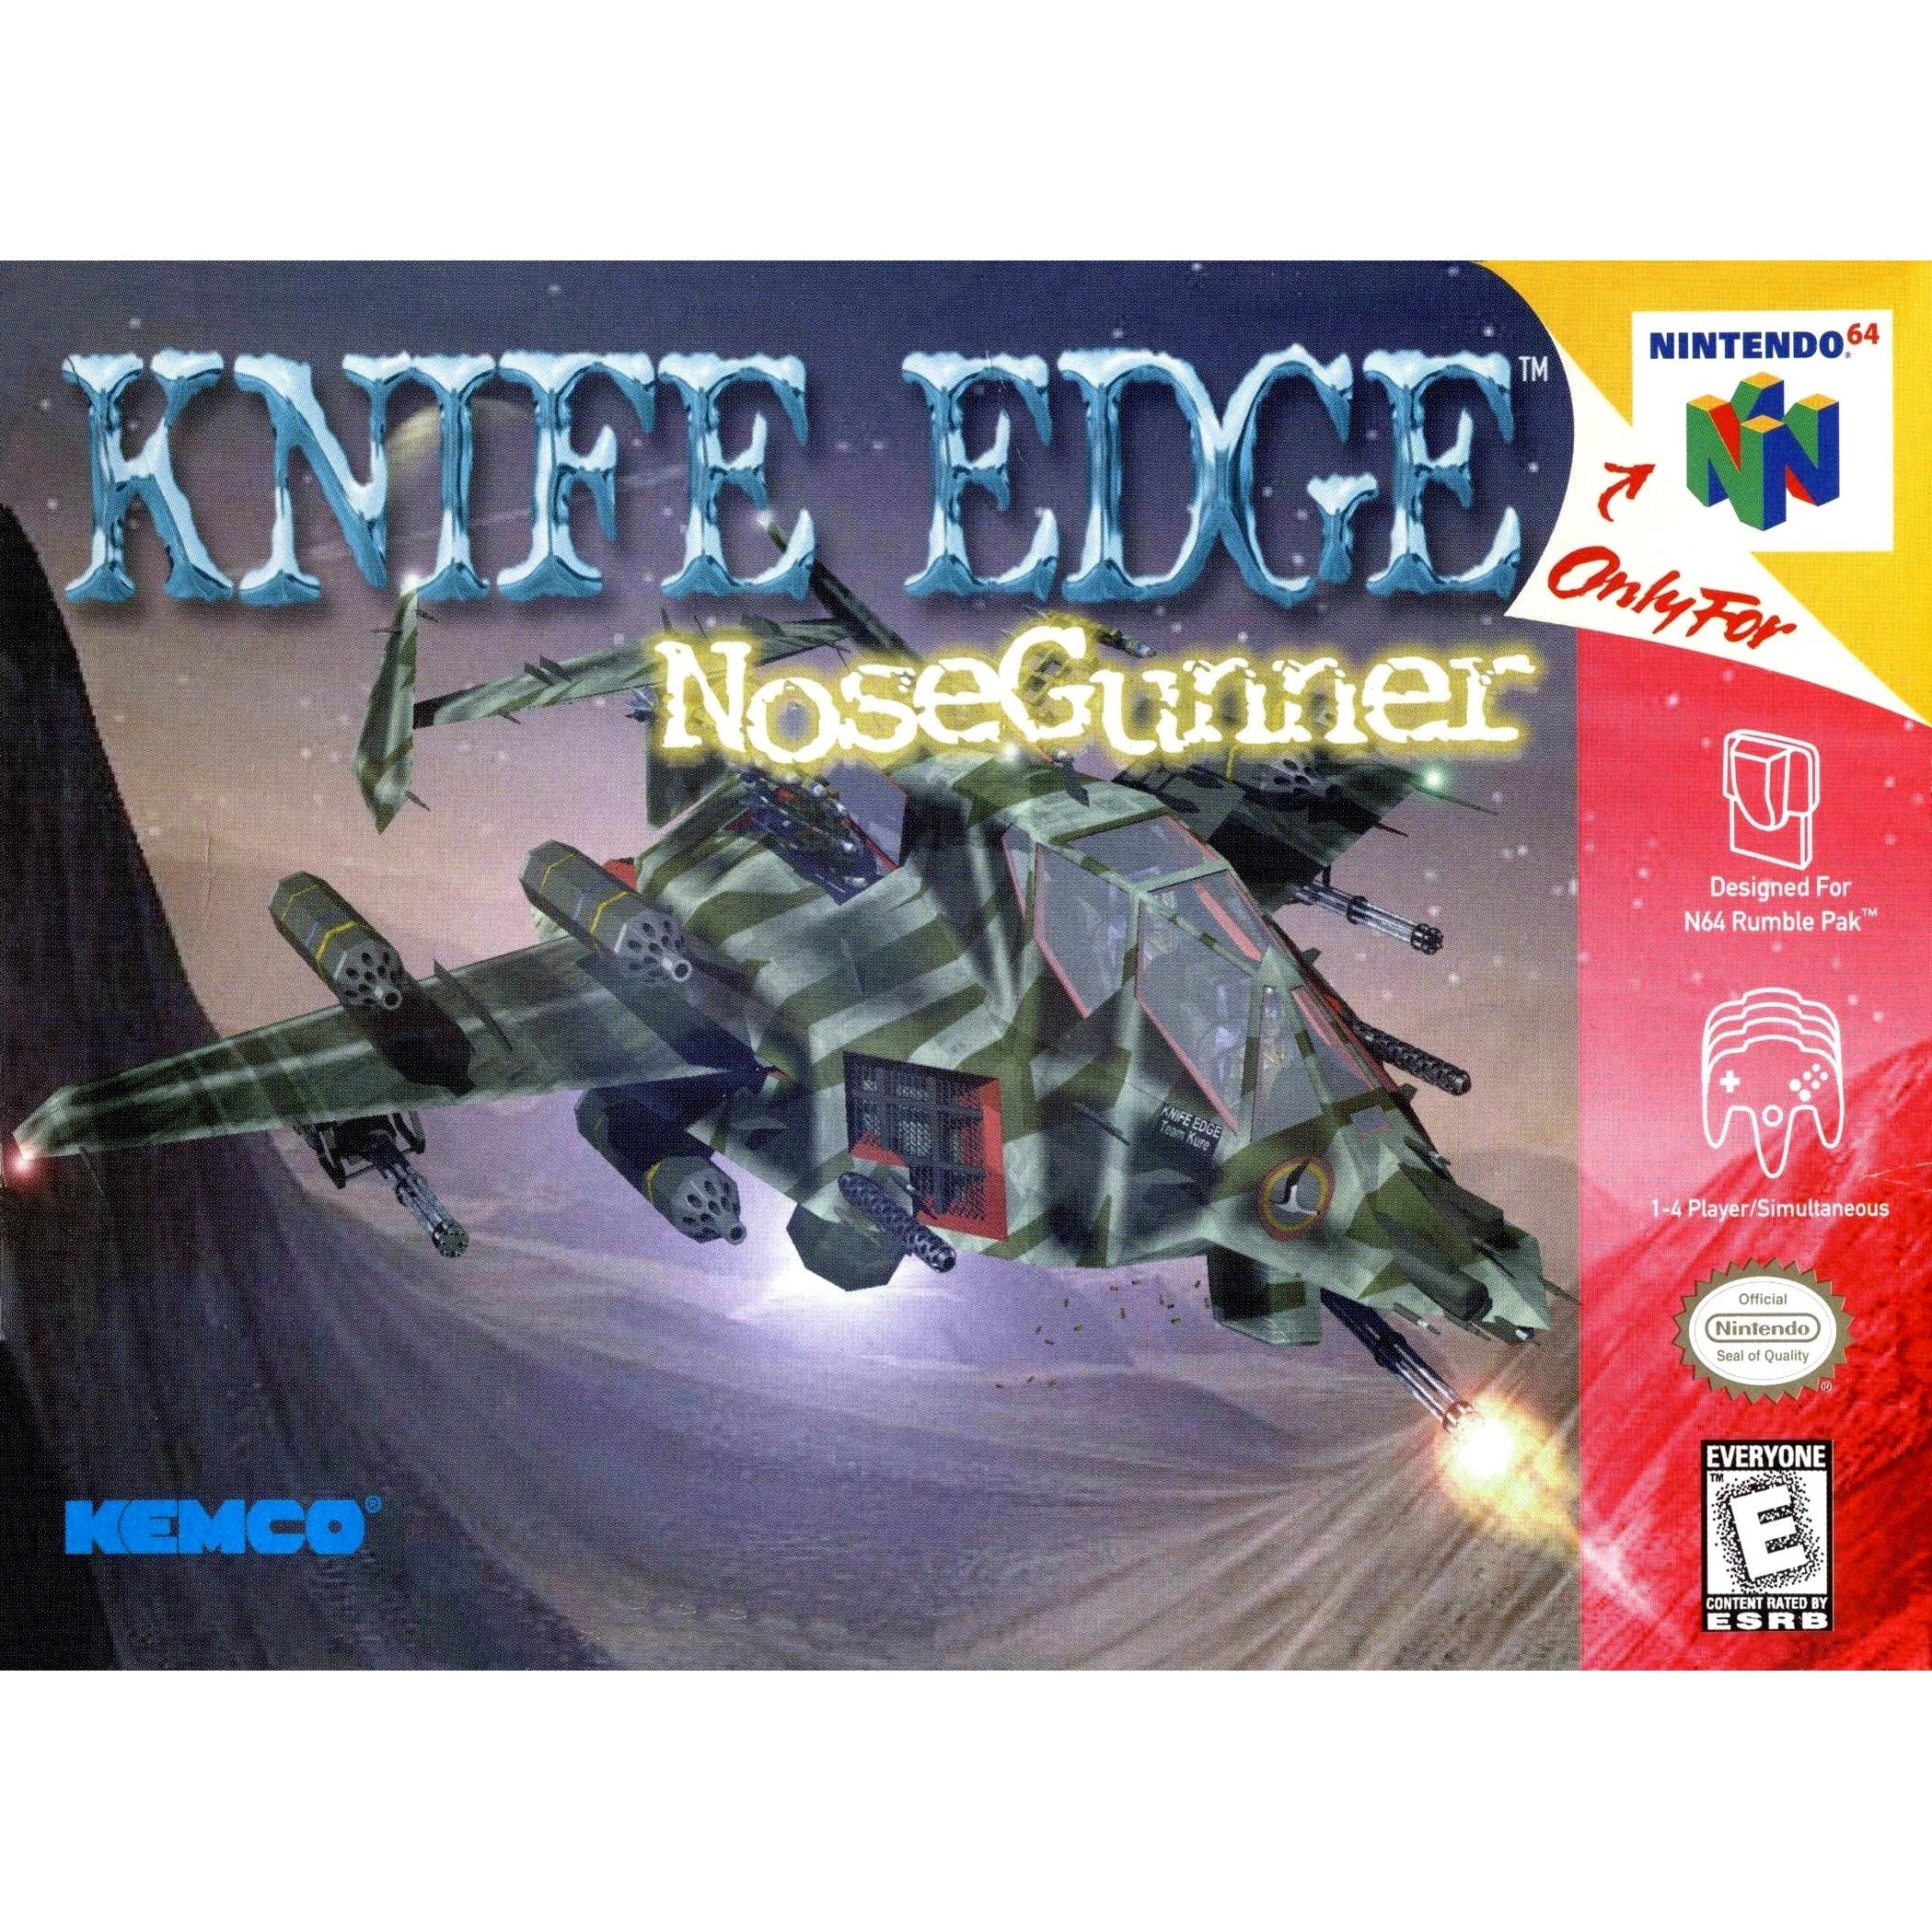 Knife Edge: Nose Gunner - Authentic Nintendo 64 (N64) Game Cartridge - YourGamingShop.com - Buy, Sell, Trade Video Games Online. 120 Day Warranty. Satisfaction Guaranteed.